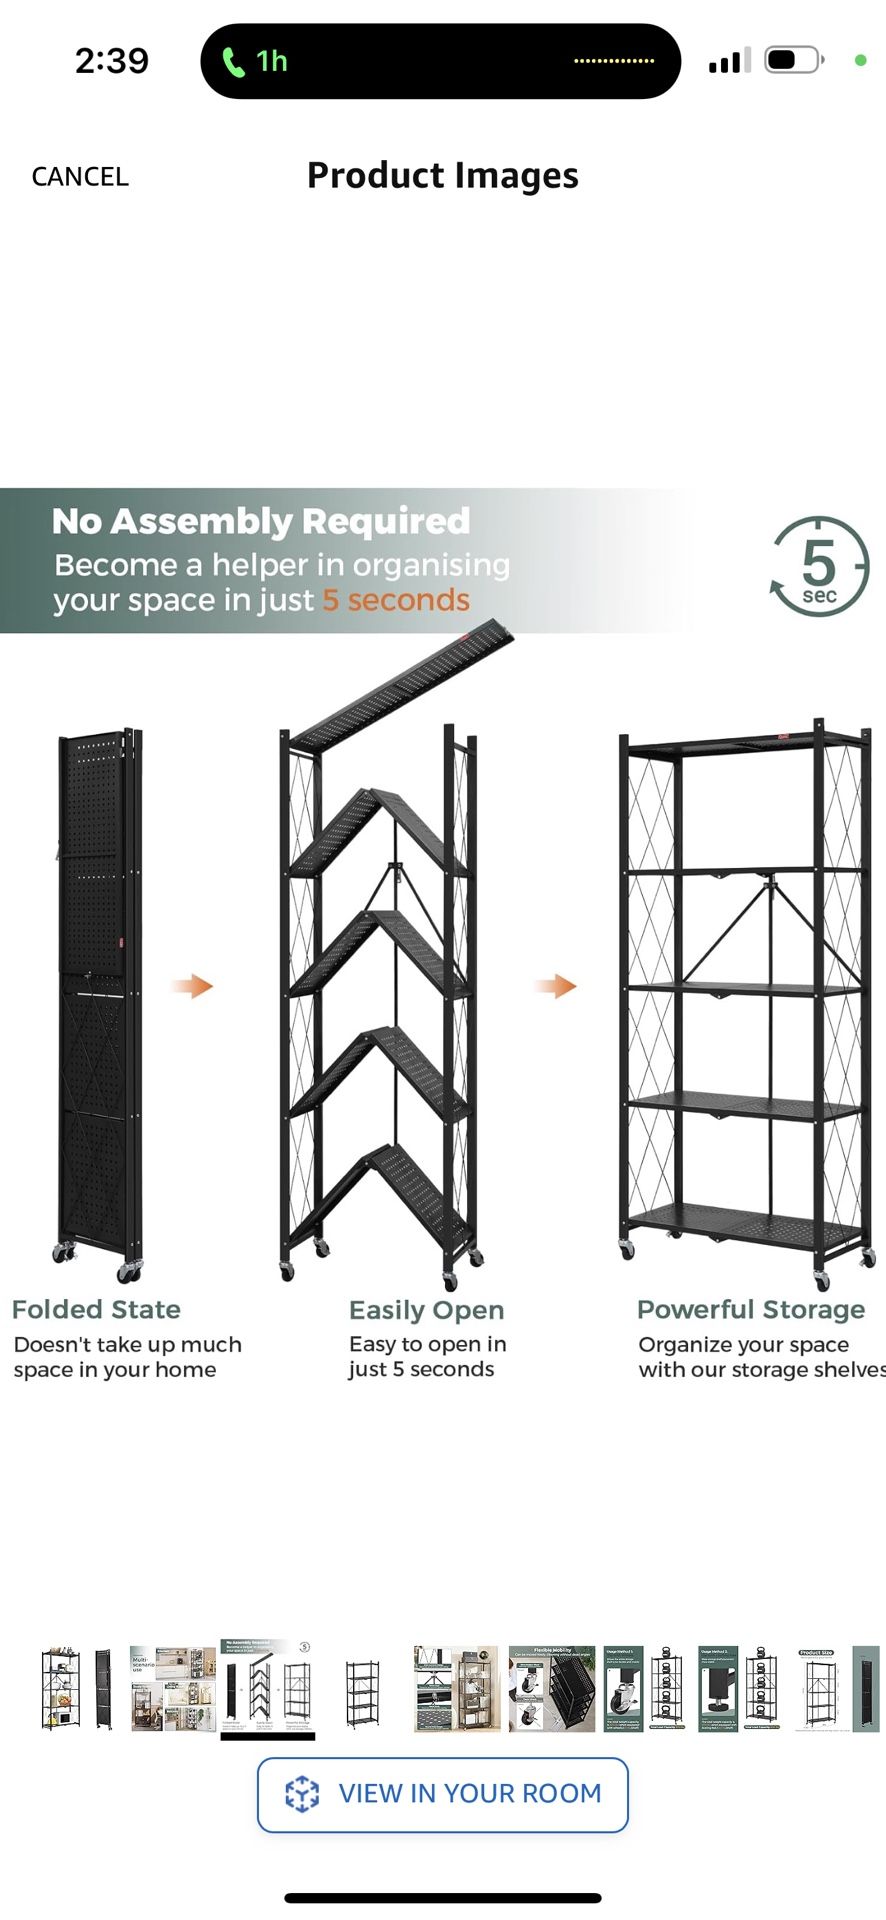 DEANIC Foldable Storage Shelves on Wheels, 5 Tier Shelves for Storage, Heavy Duty Metal Shelving Units, No Assembly Storage Rack for Garage, Kitchen, 